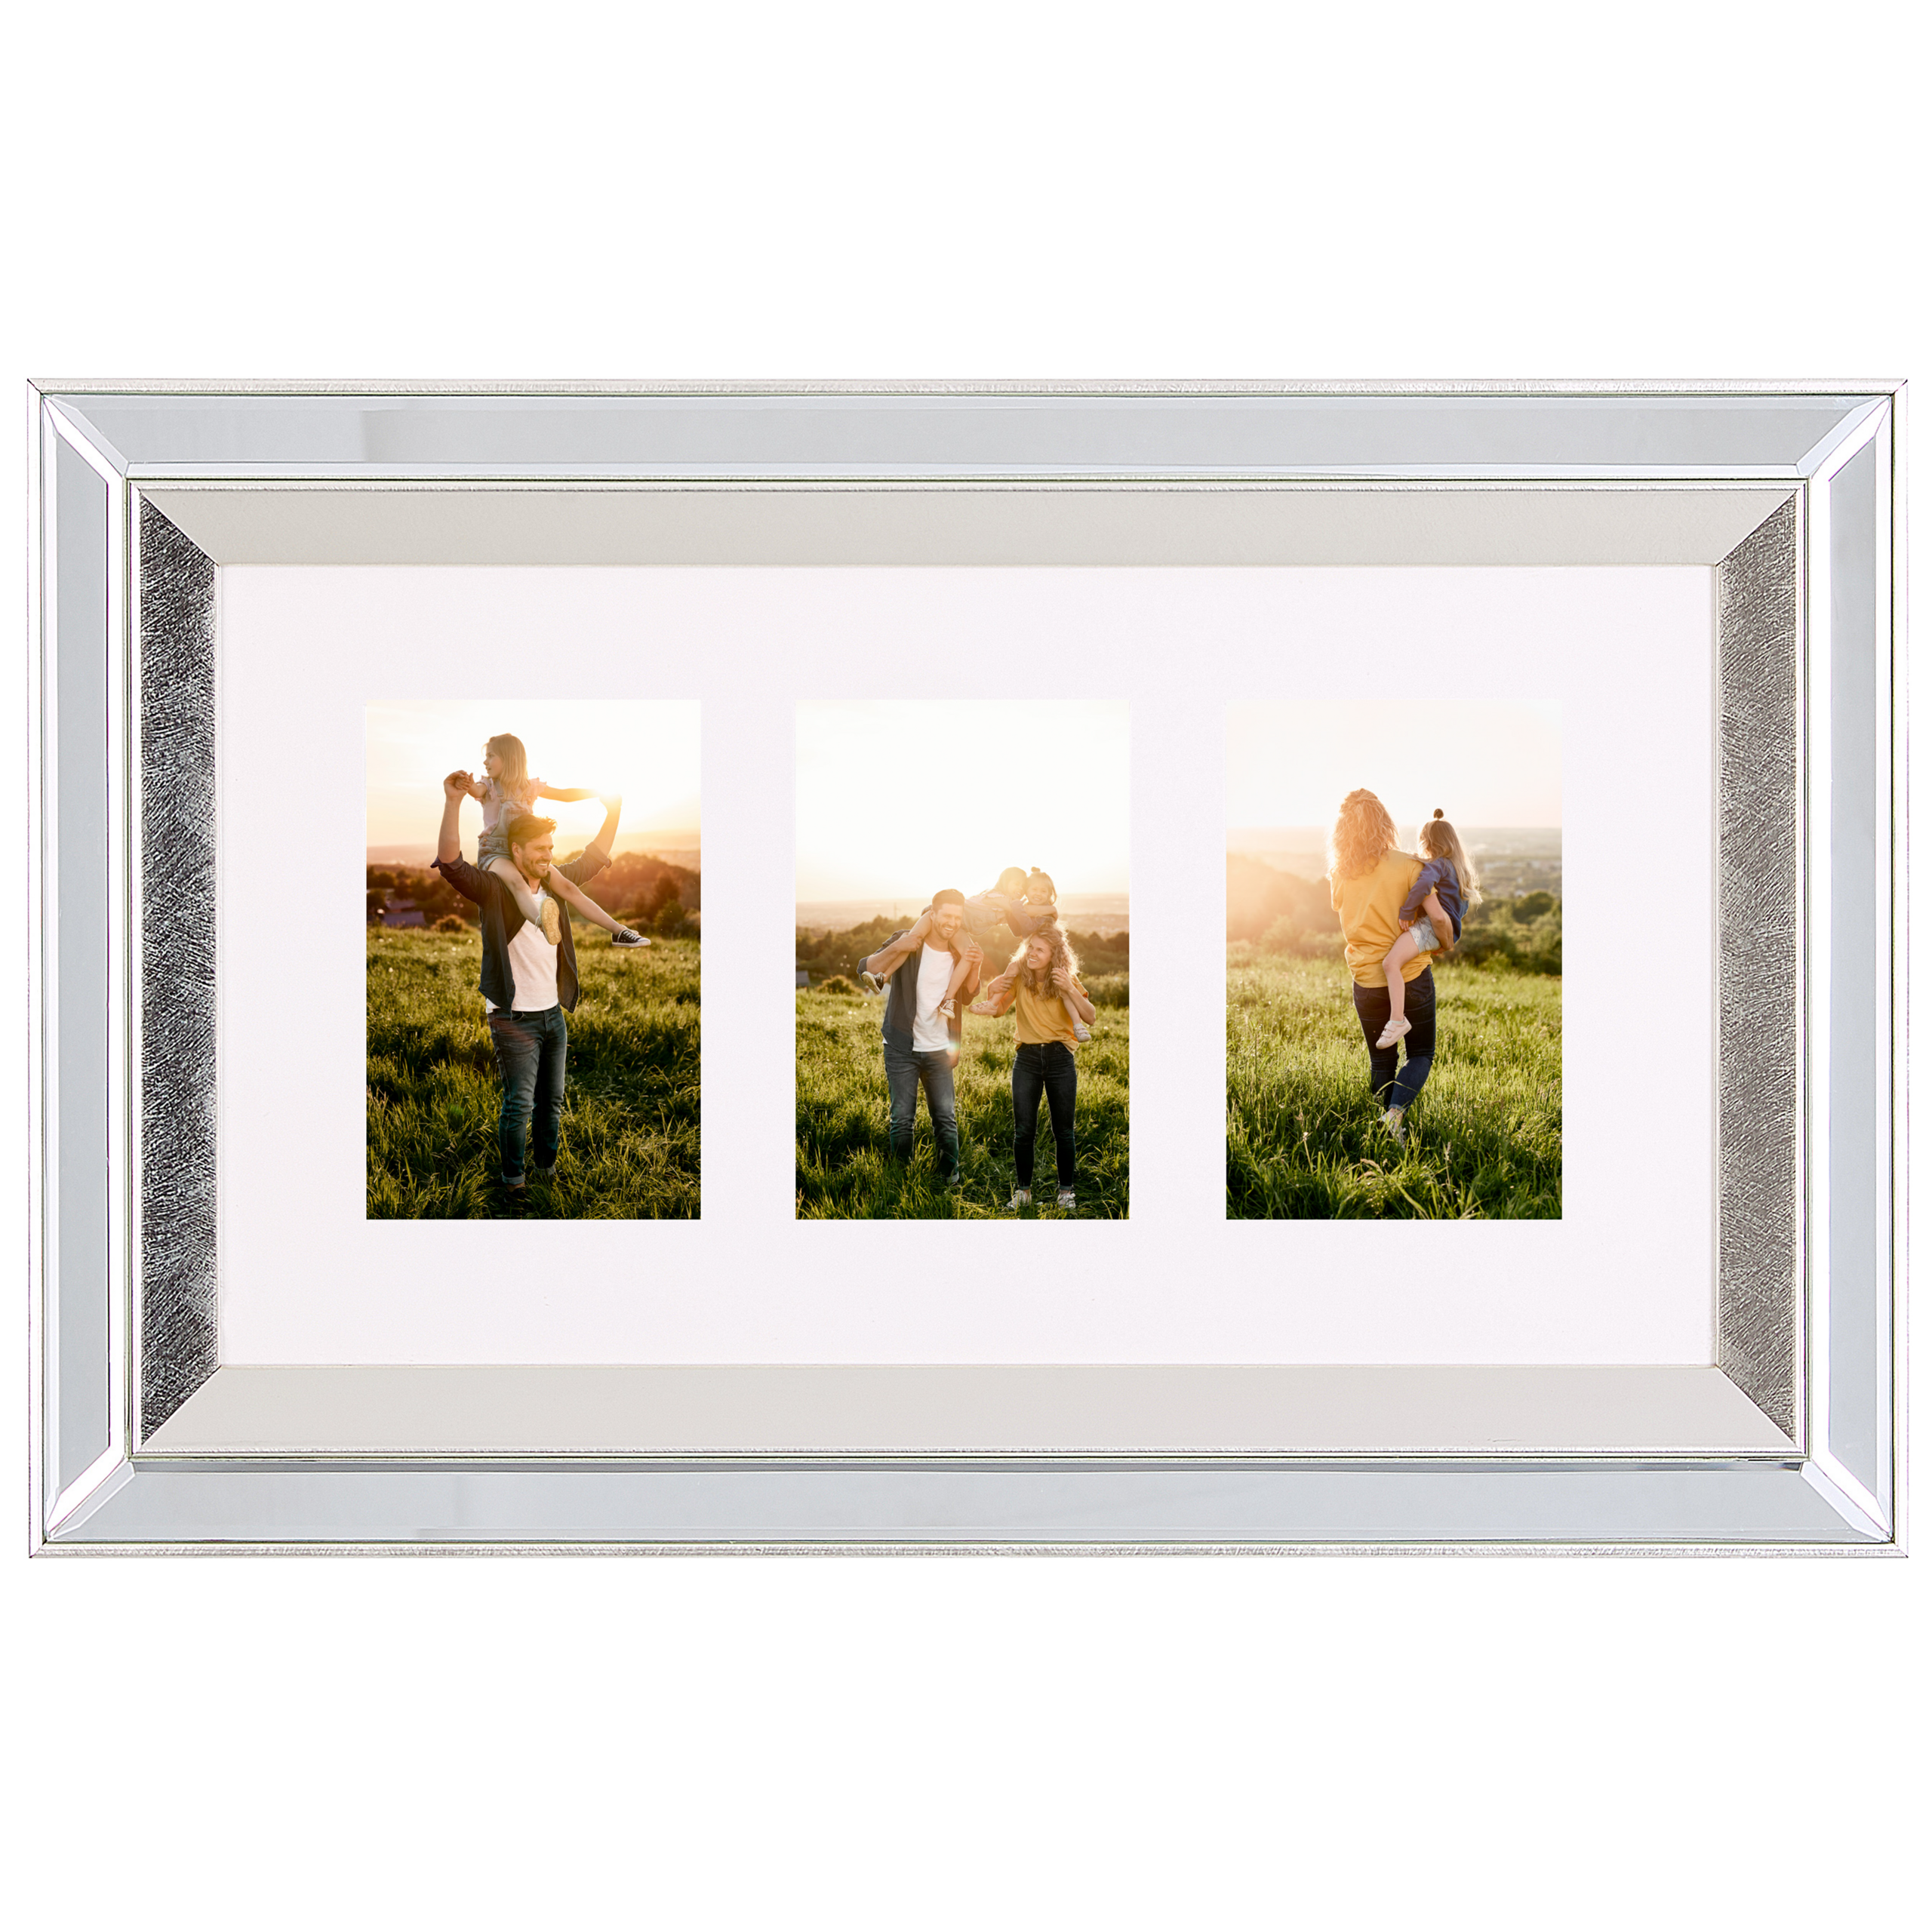 Beliani Multi Photo Frame Silver Glass Mirrored 32 x 50 cm for 3 Pictures 10 x 15 cm Collage Aperture